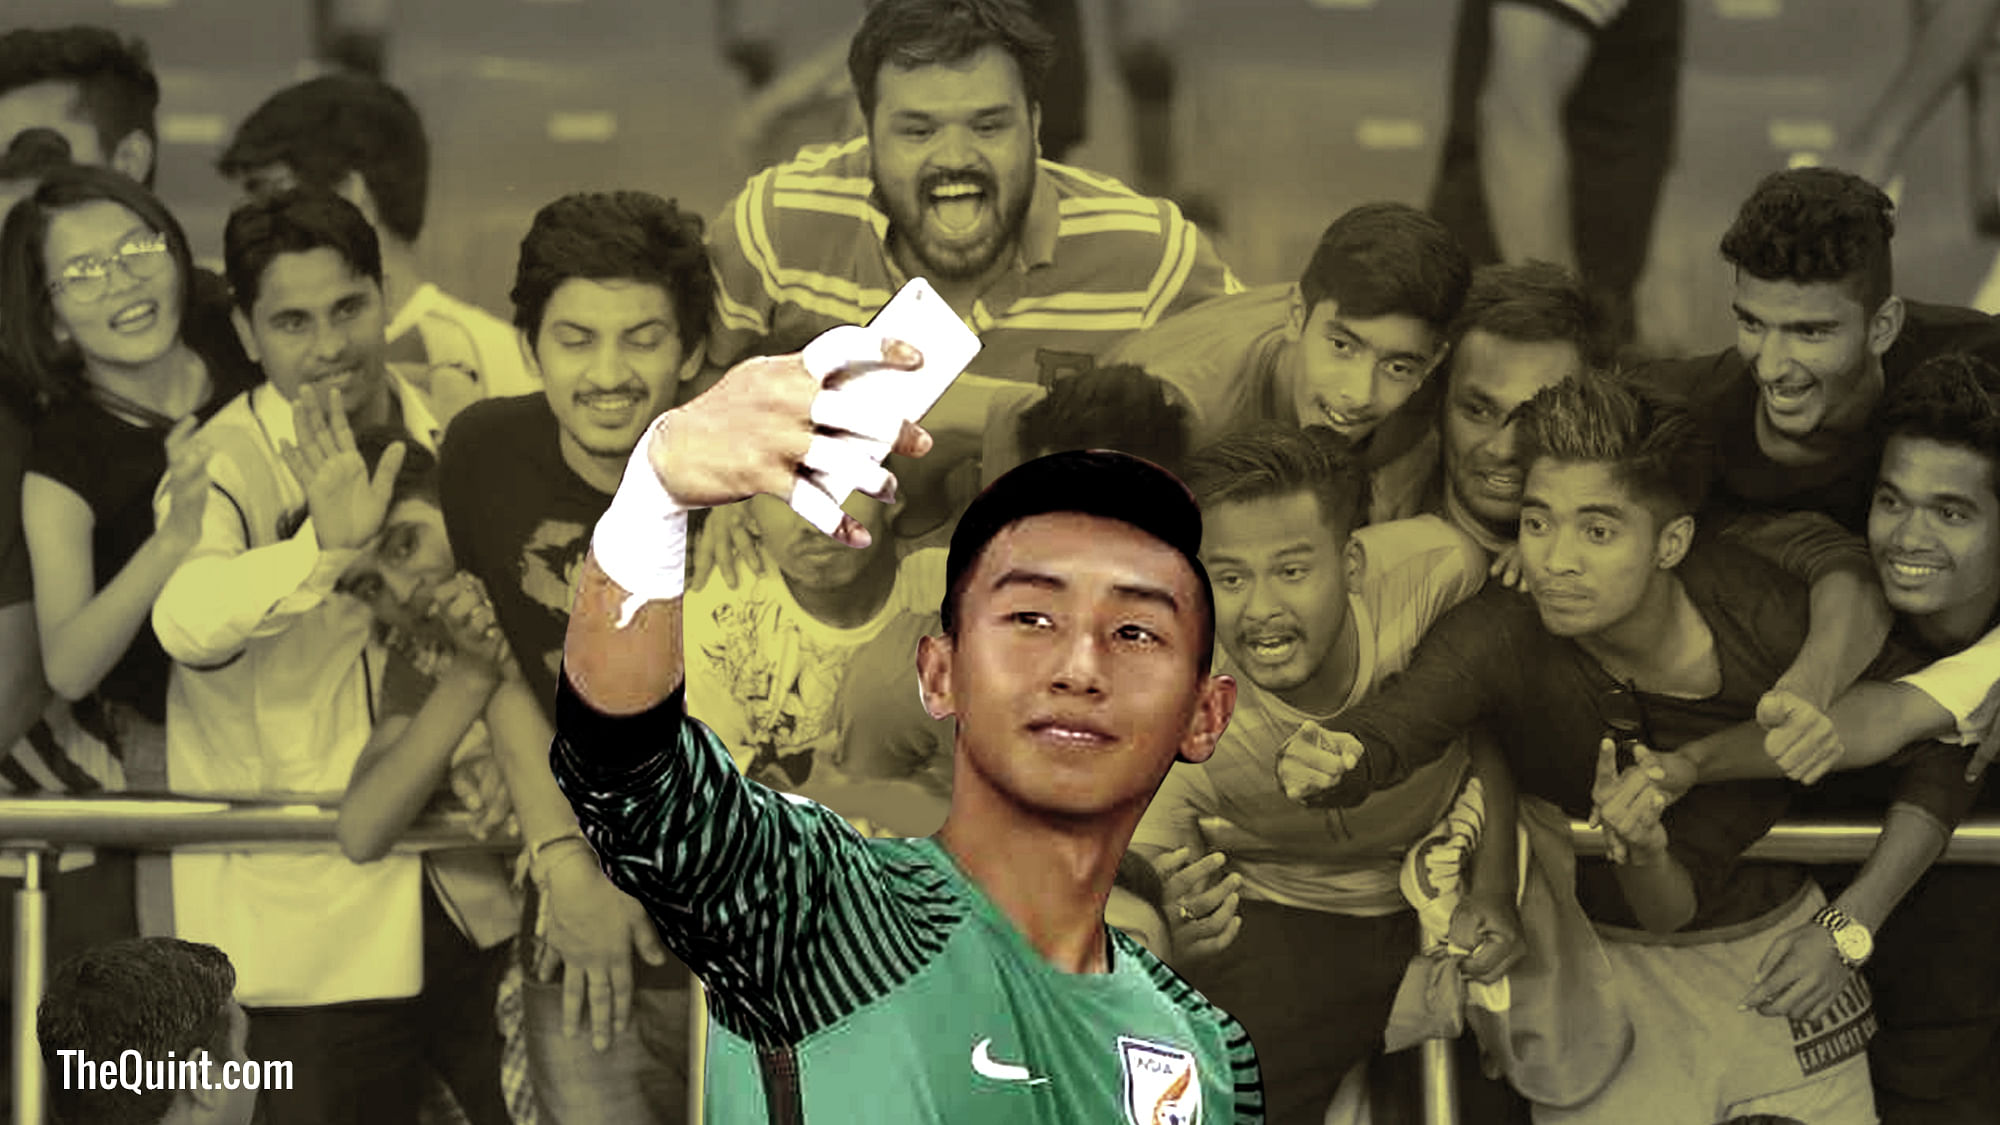 Indian keeper Dheeraj Singh takes a picture with fans after the match against Colombia.